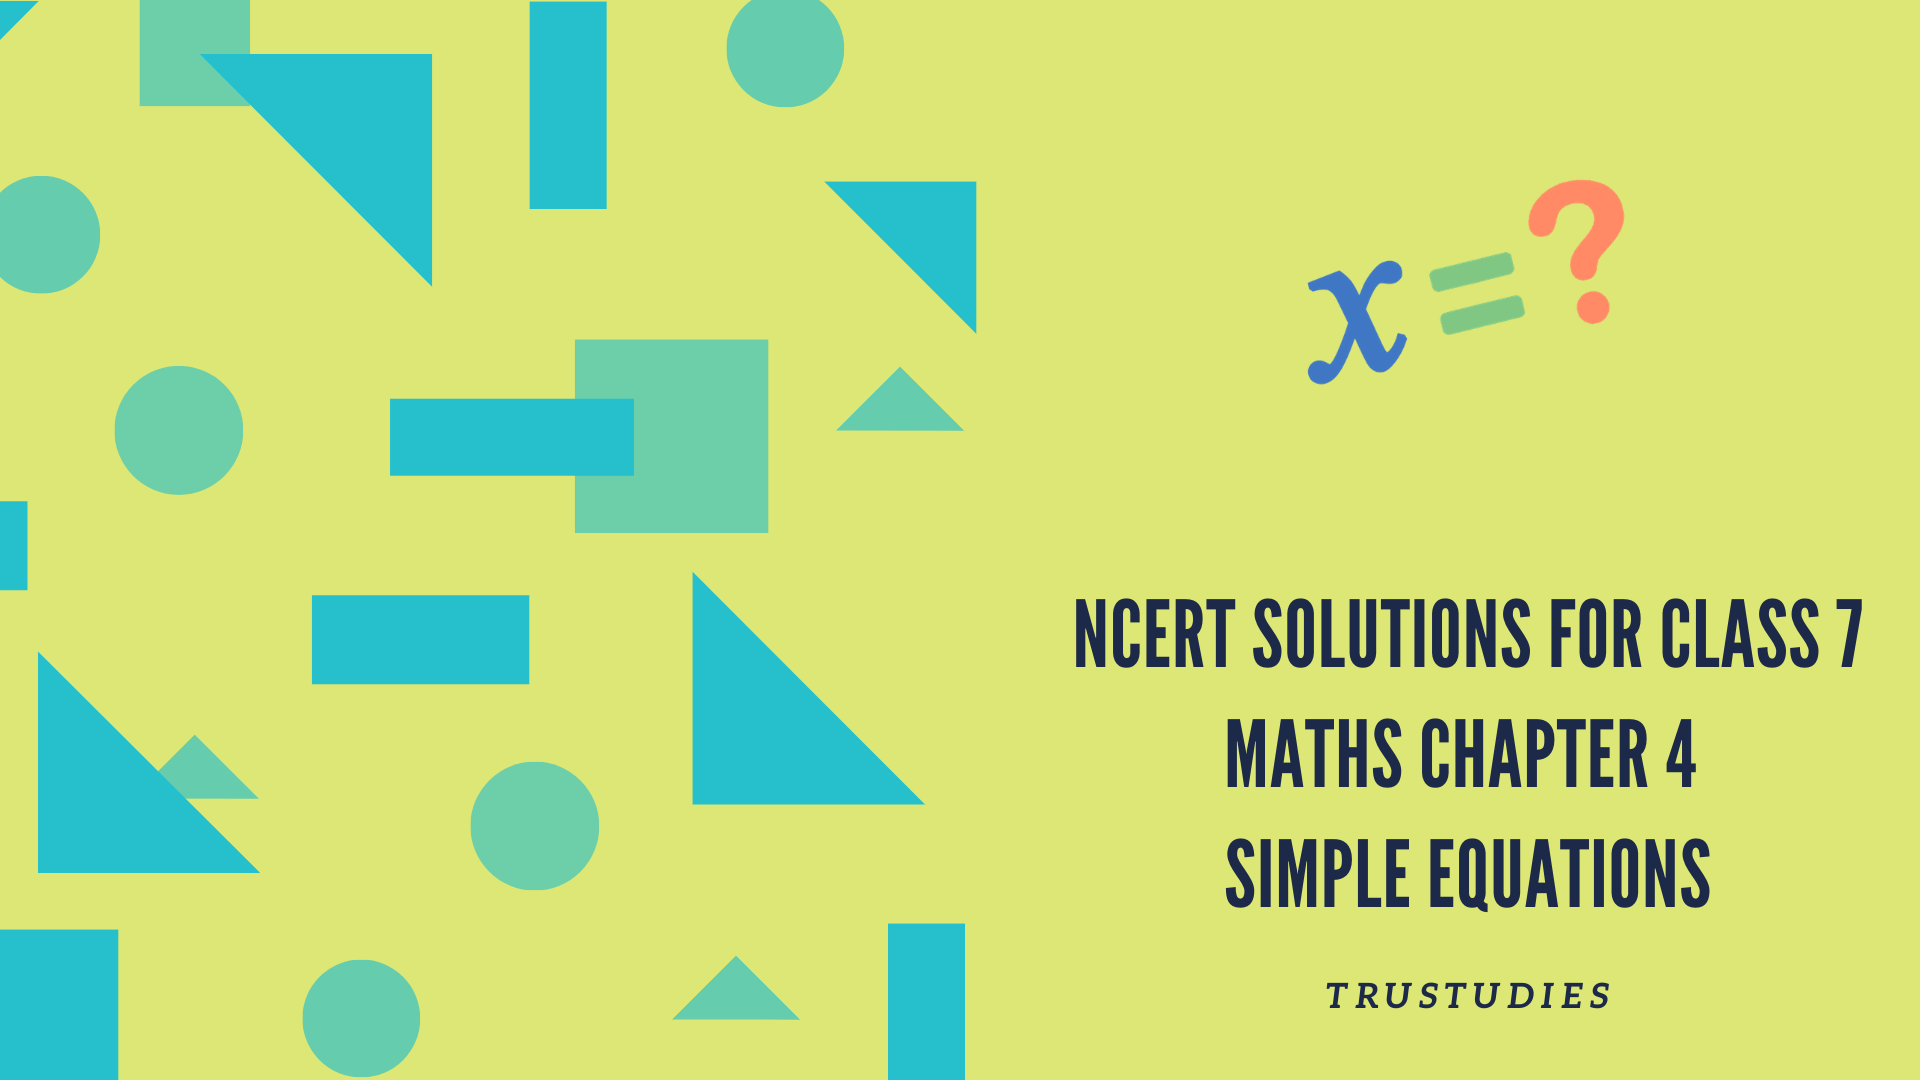 NCERT solutions for class 7 maths chapter 4 simple equations banner image